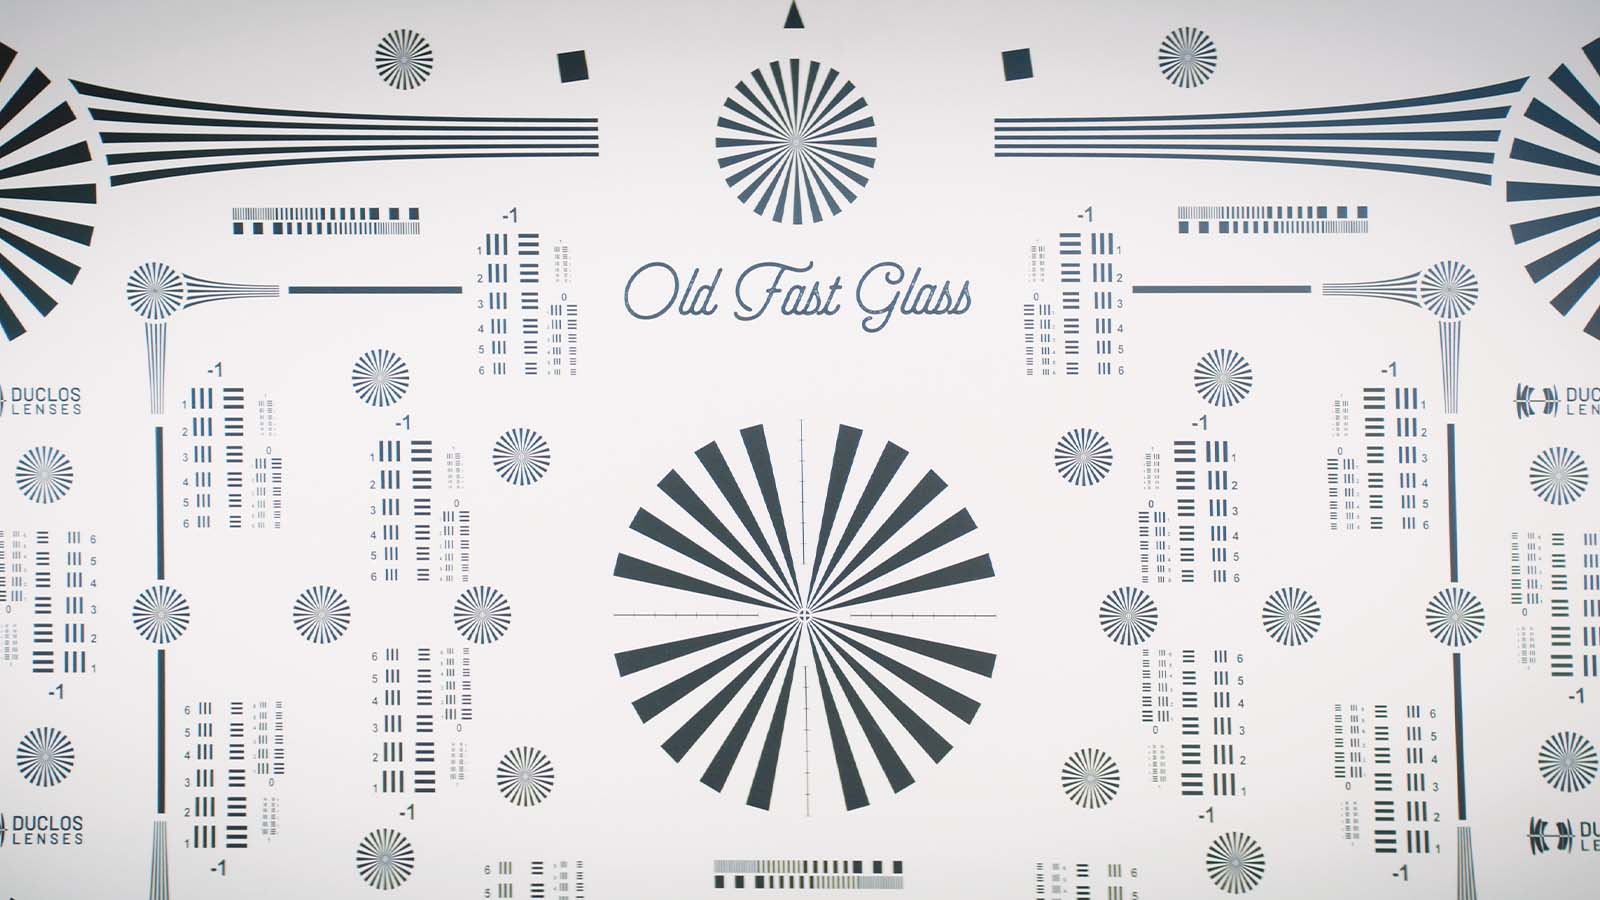 Lens testing chart for Old Fast Glass.